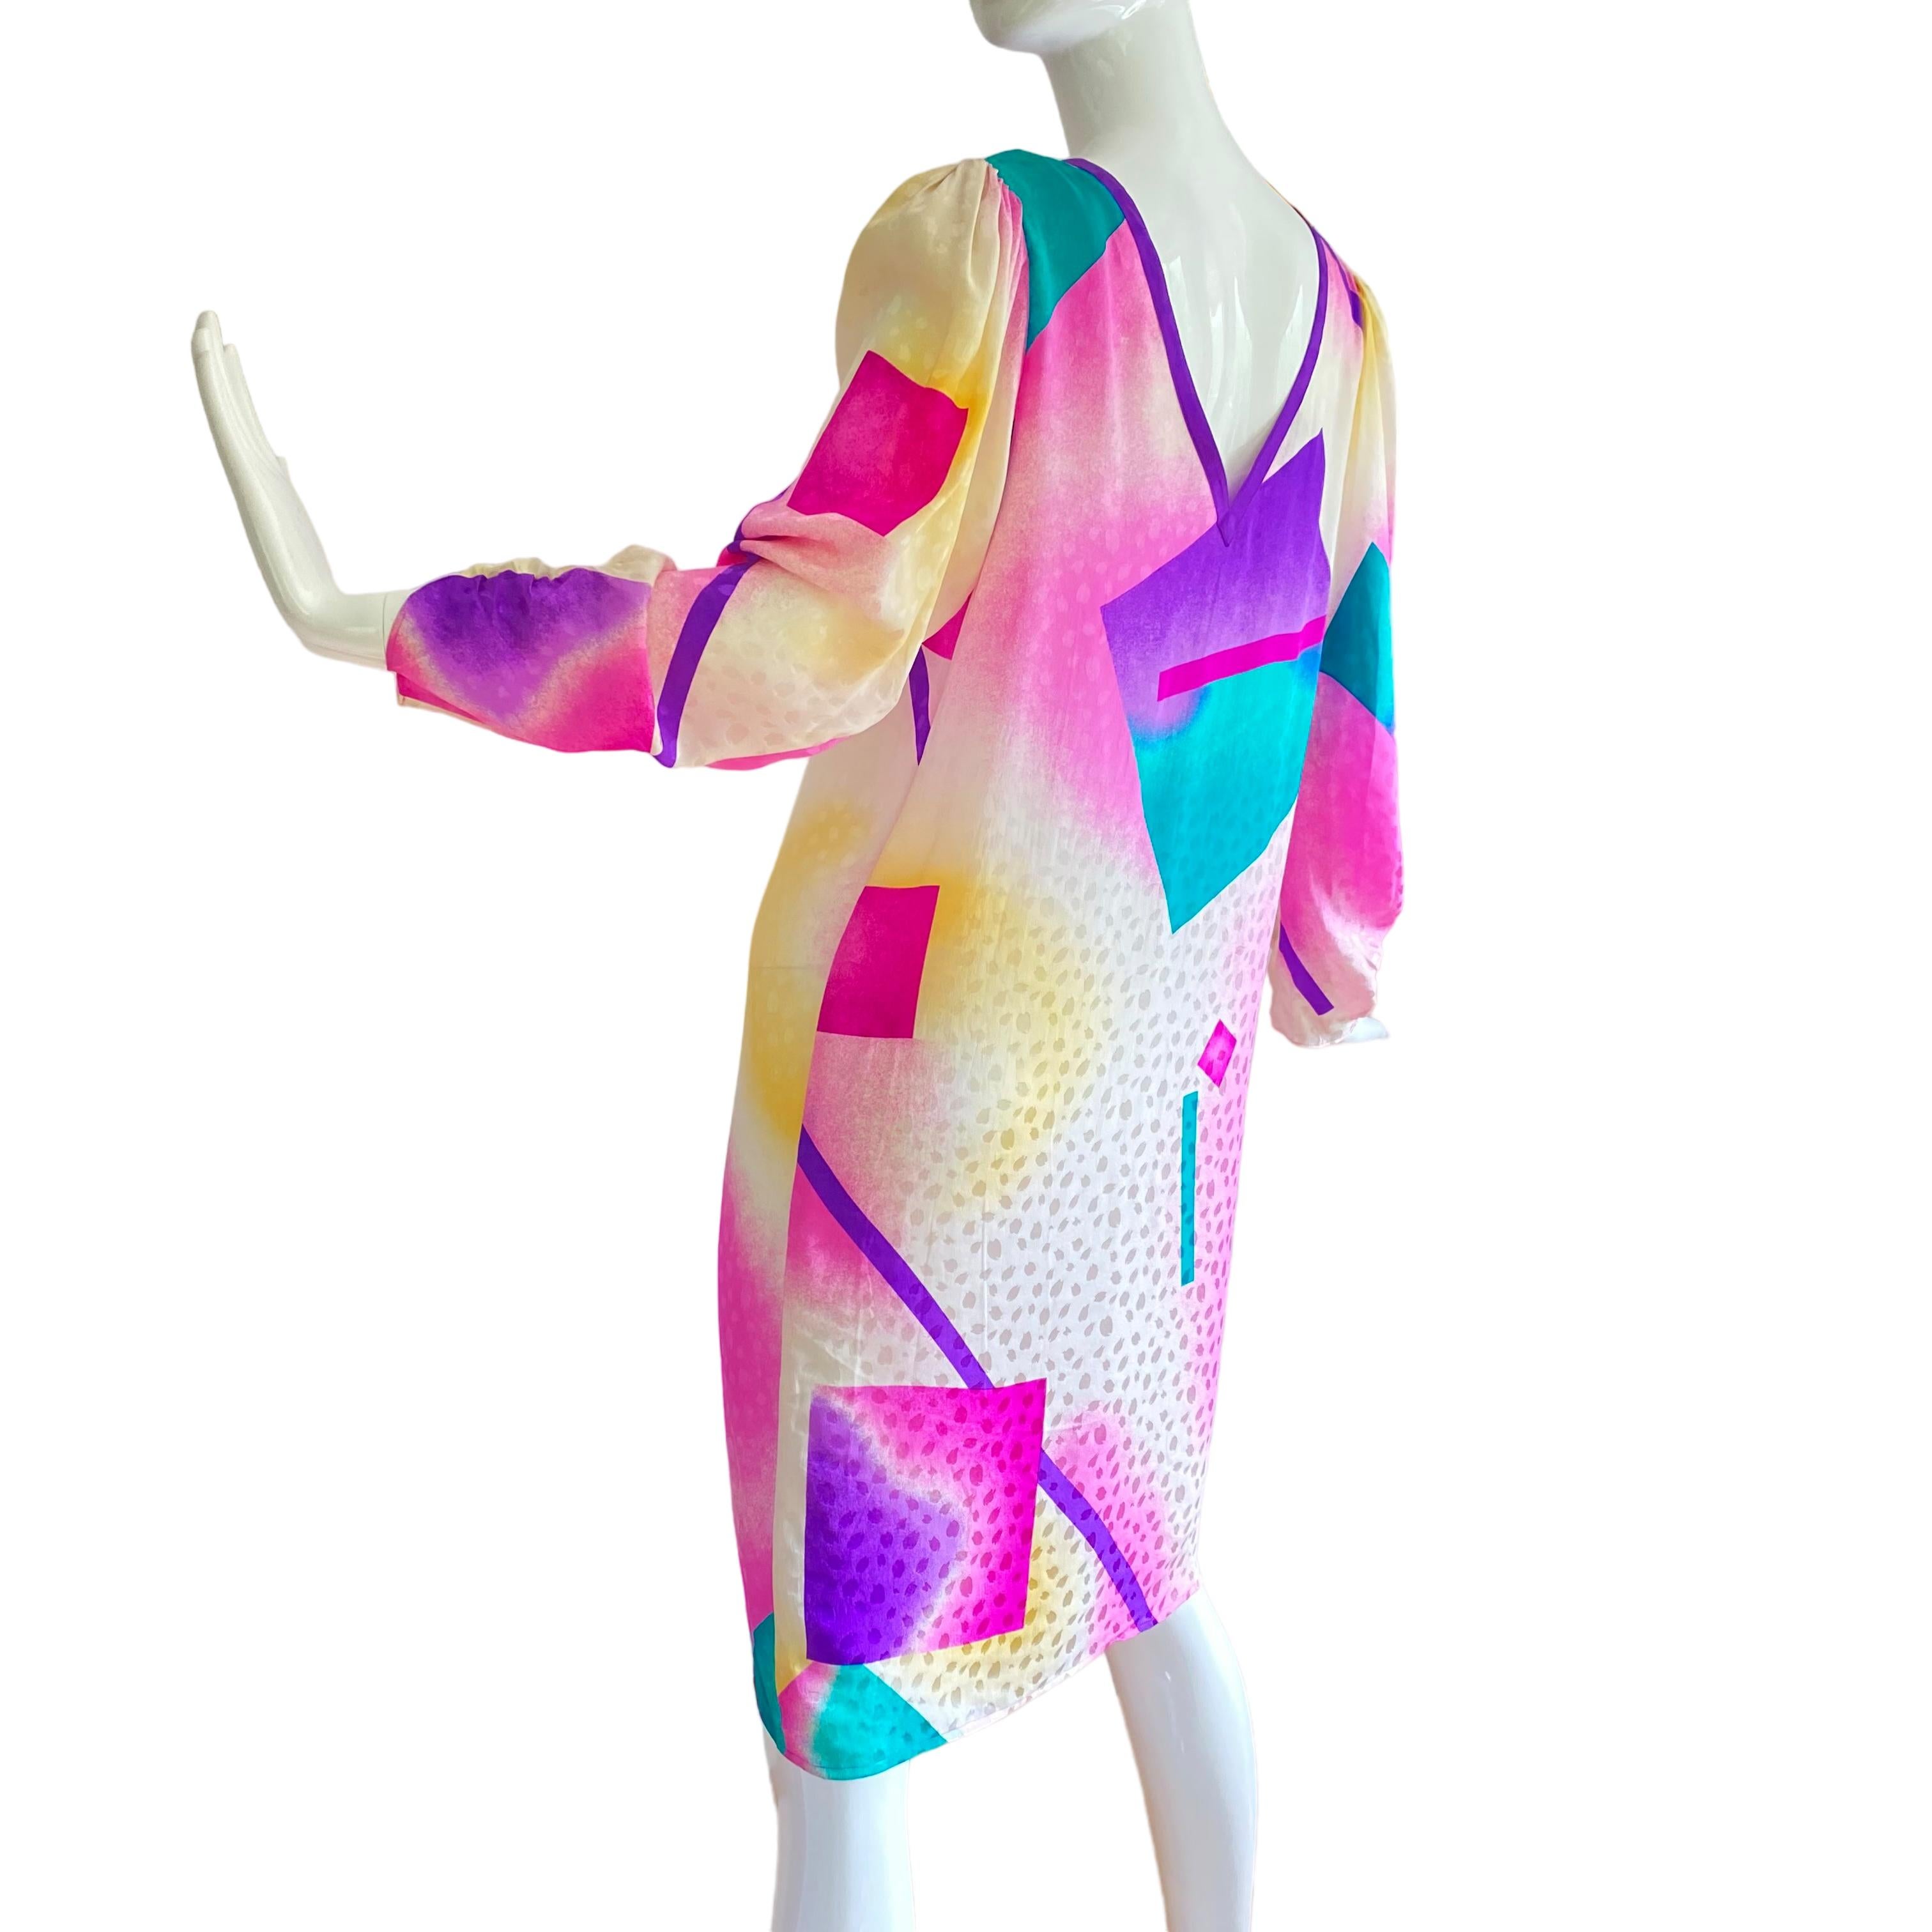 Style: Flora Kung Fiona dress.
Fabric: 100% silk petal jacquard.
Print: Airbrushed splash paint in pink, purple, aqua, and yellow on white. Puff long sleeves. Neckline trimmed in purple silk. 
Approximately 40